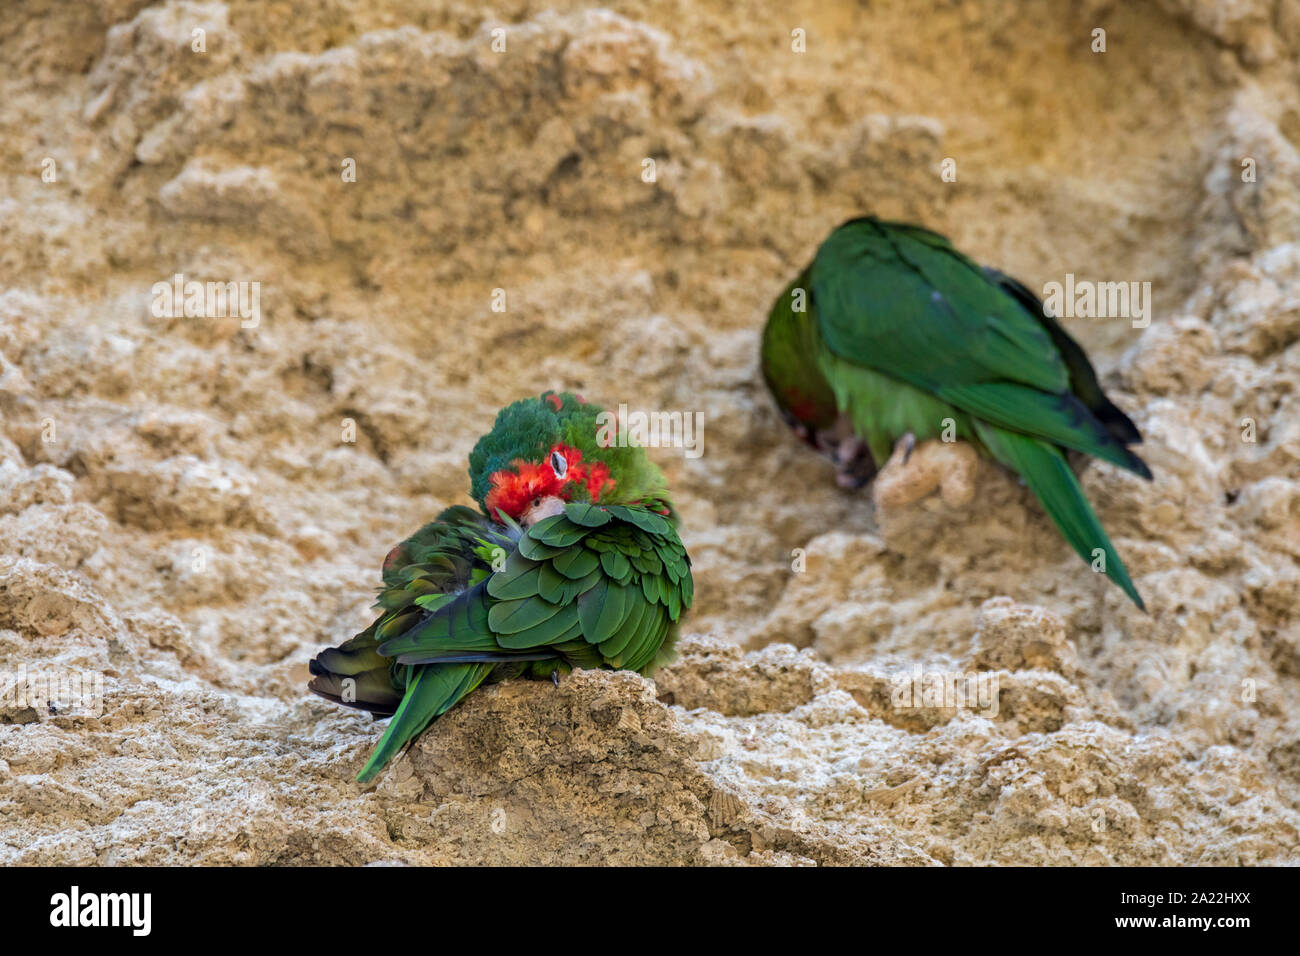 Mitred parakeets / mitred conures (Psittacara mitratus) sleeping in rock face, native to South American Andes from Peru through Bolivia to Argentina Stock Photo